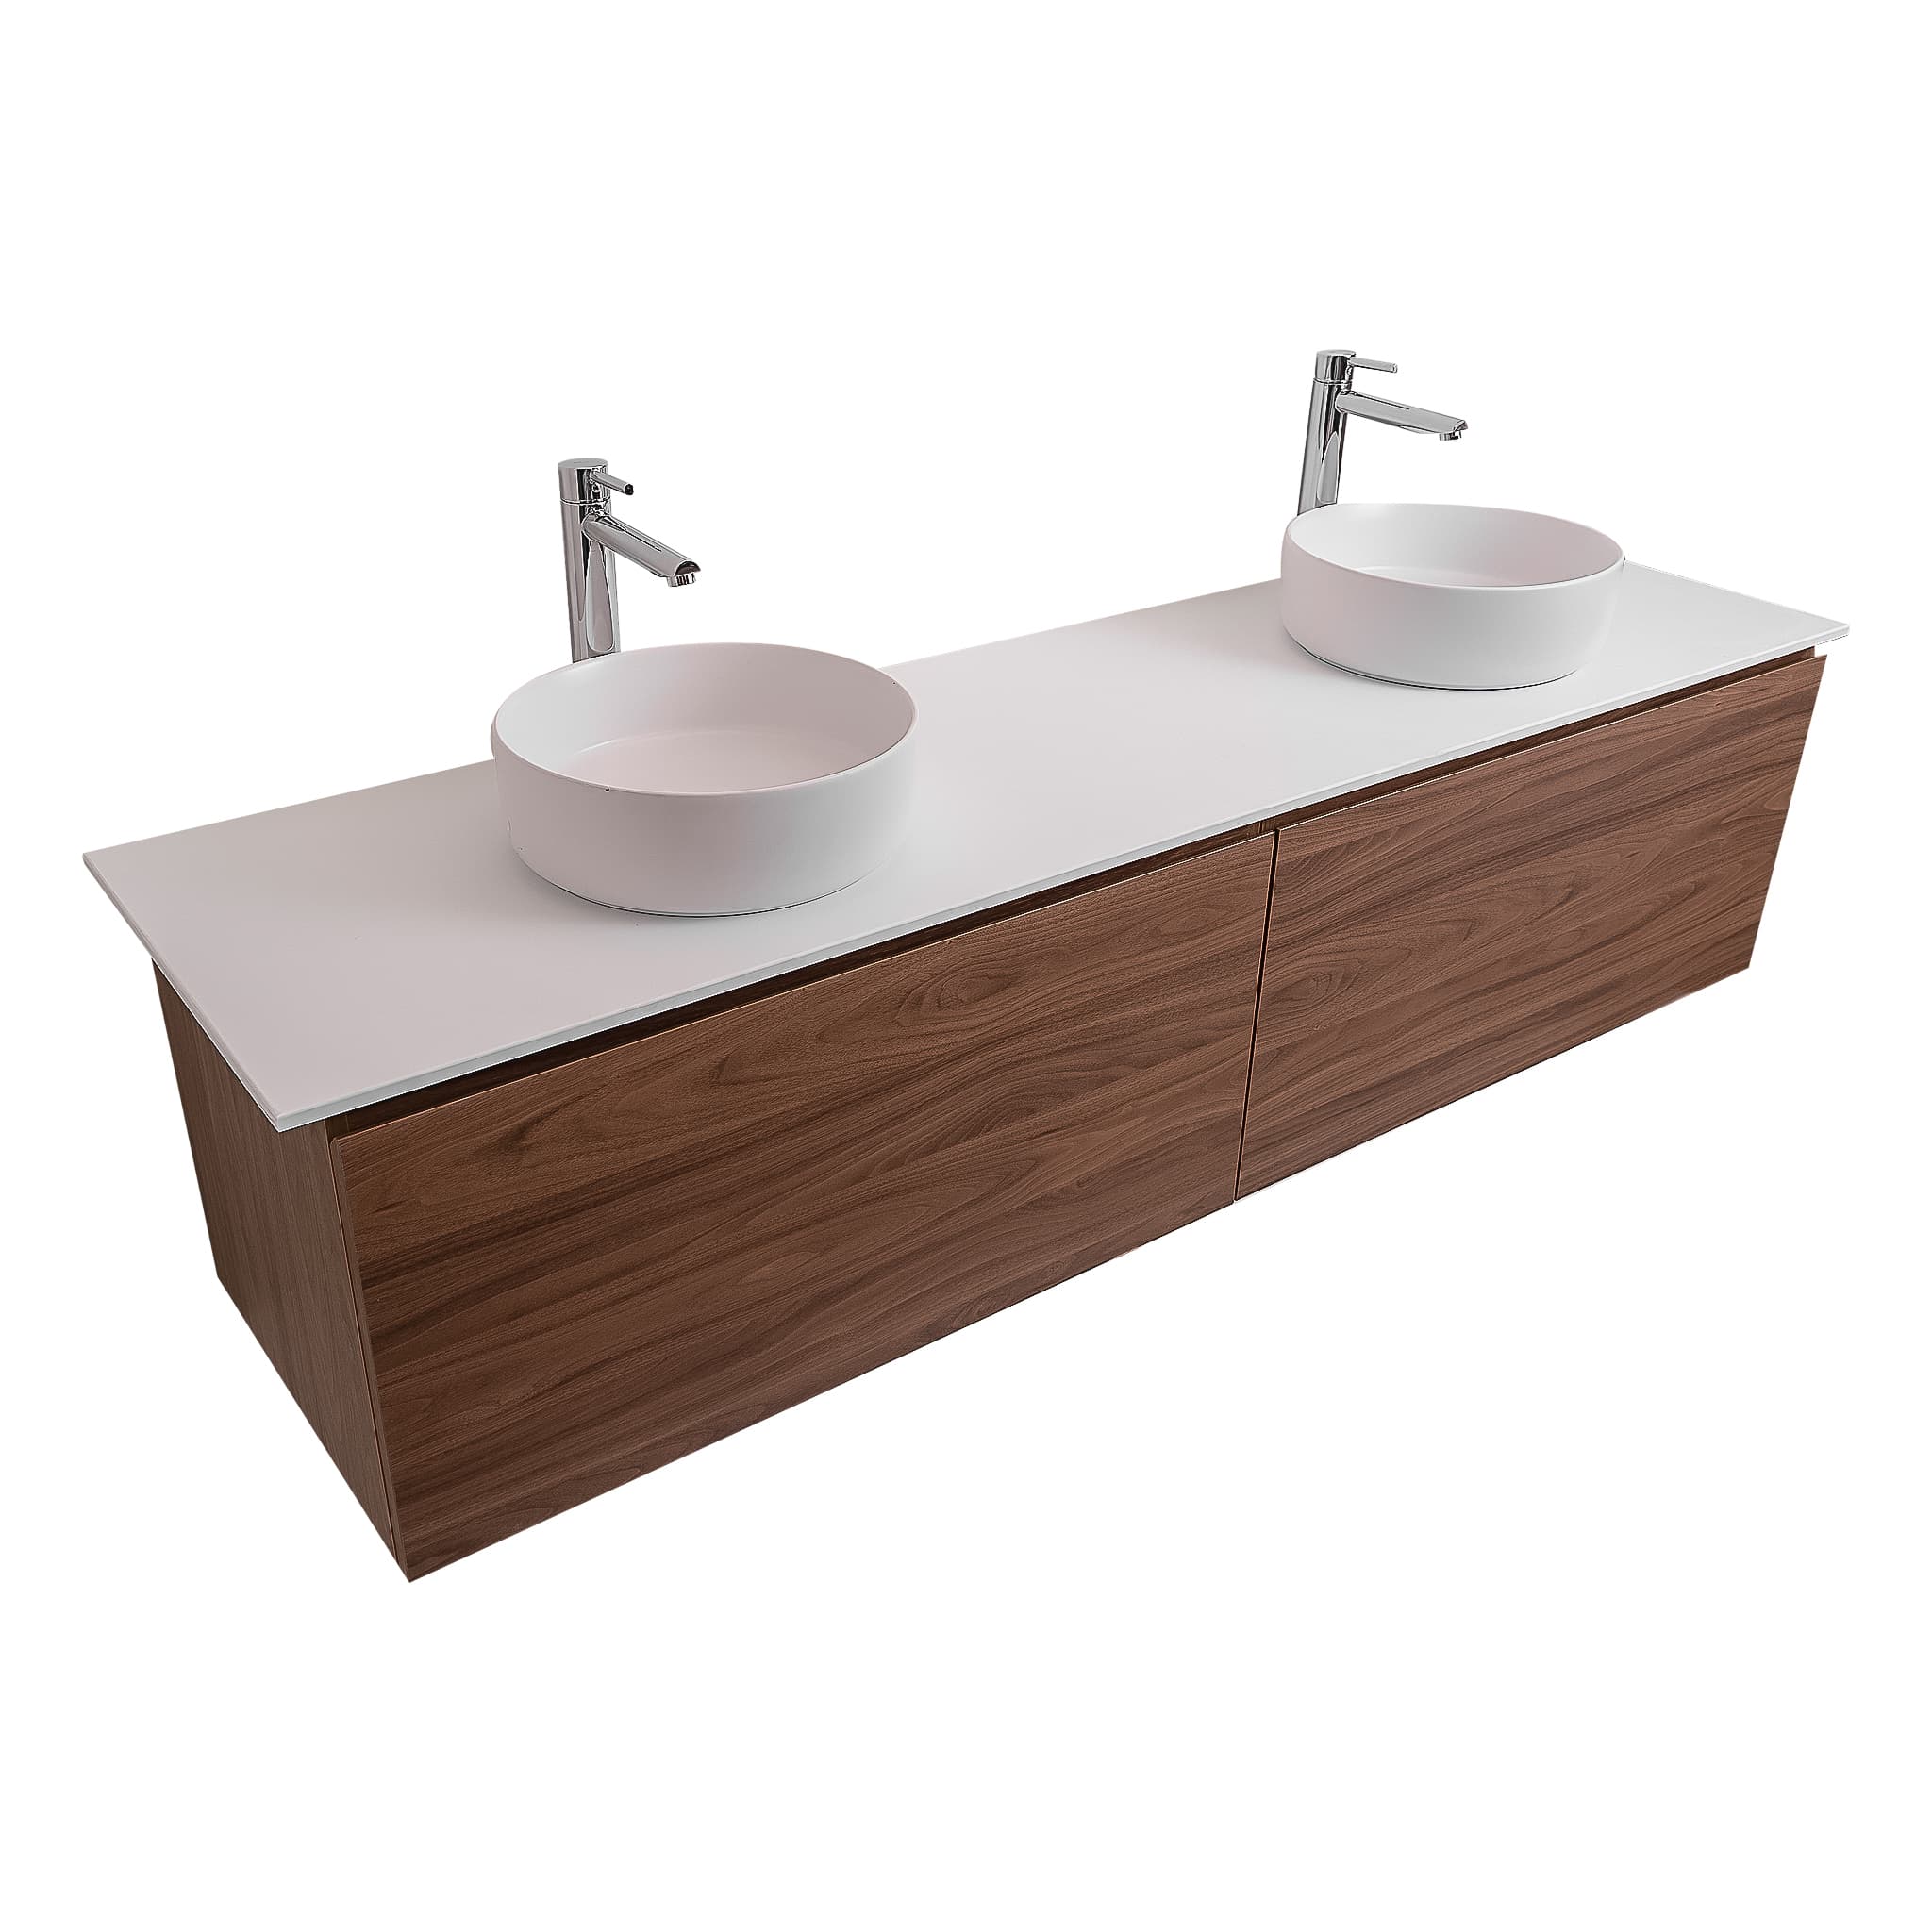 Venice 72 Walnut Wood Texture Cabinet, Ares White Top And Two Ares White Ceramic Basin, Wall Mounted Modern Vanity Set